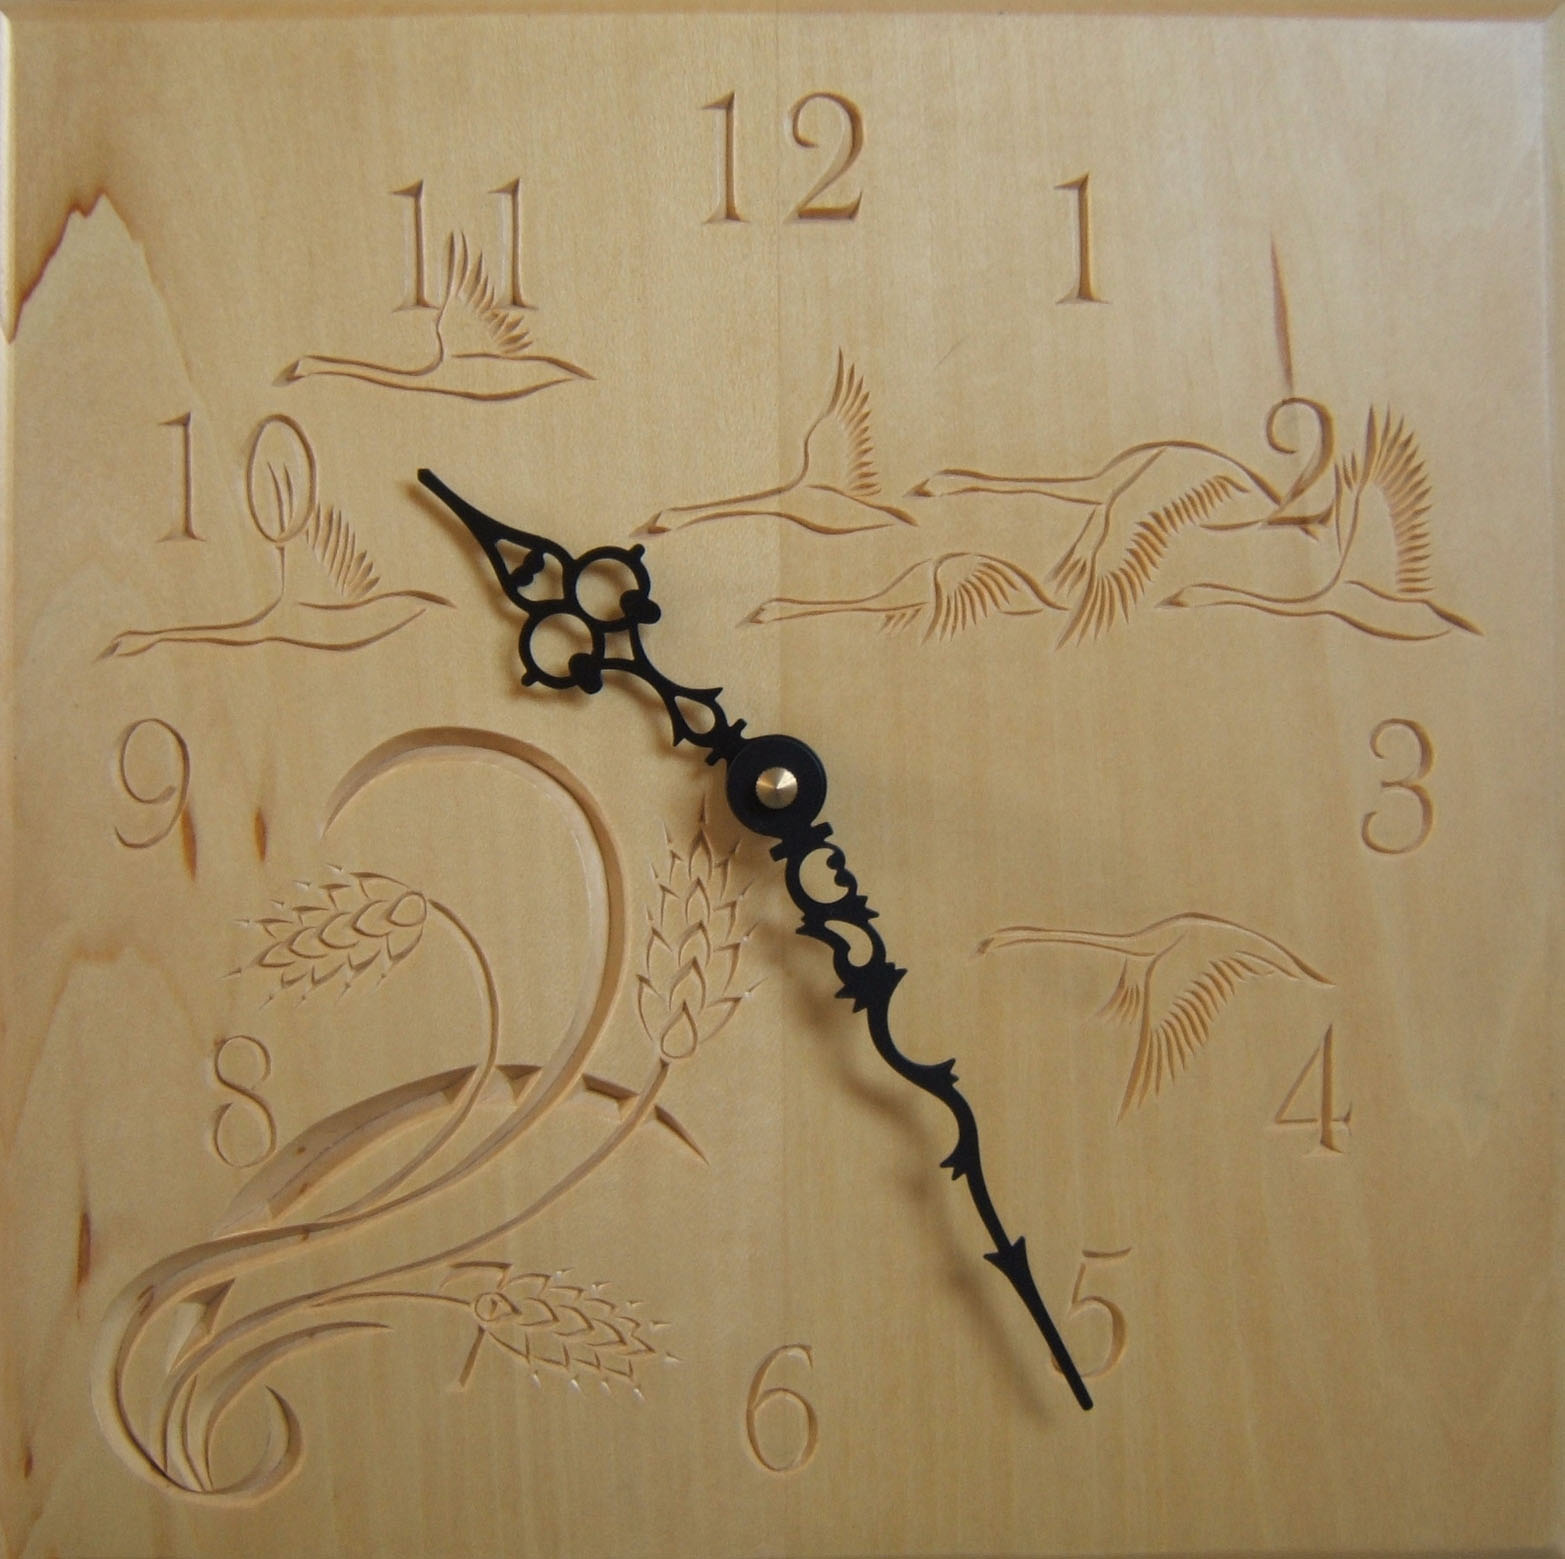 easy wood carving patterns